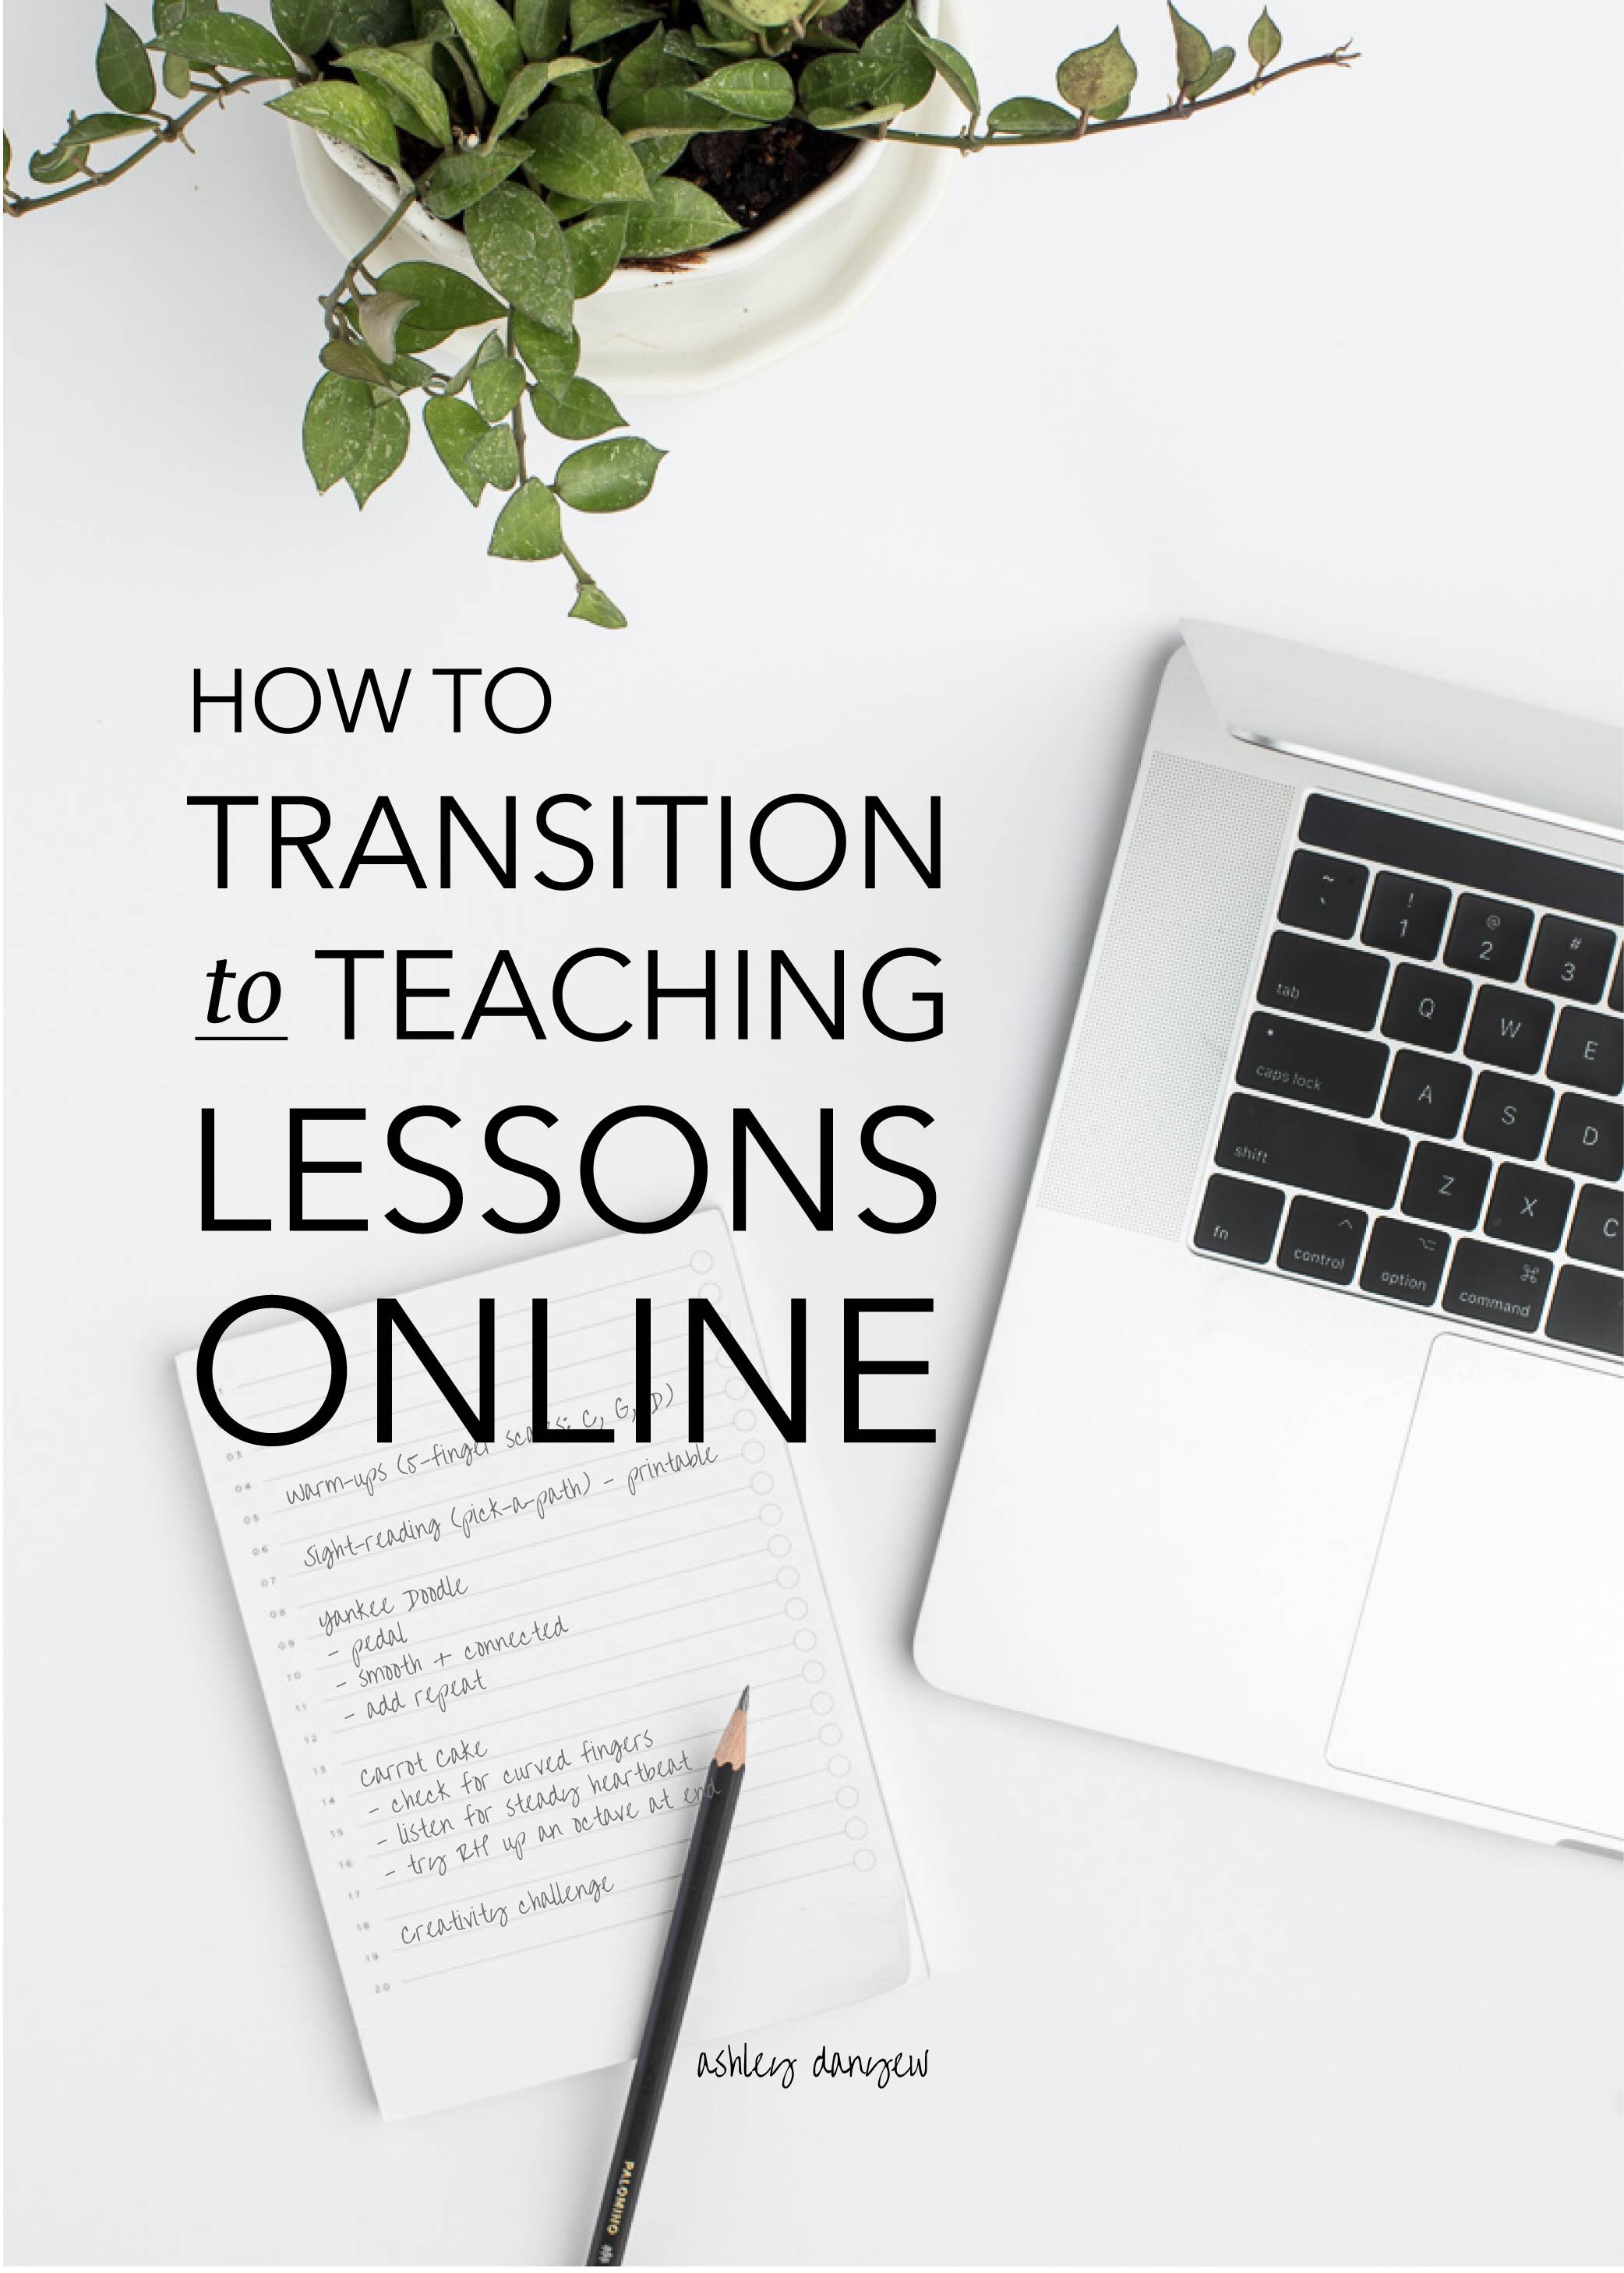 How to Transition to Teaching Lessons Online (Due to COVID-19)